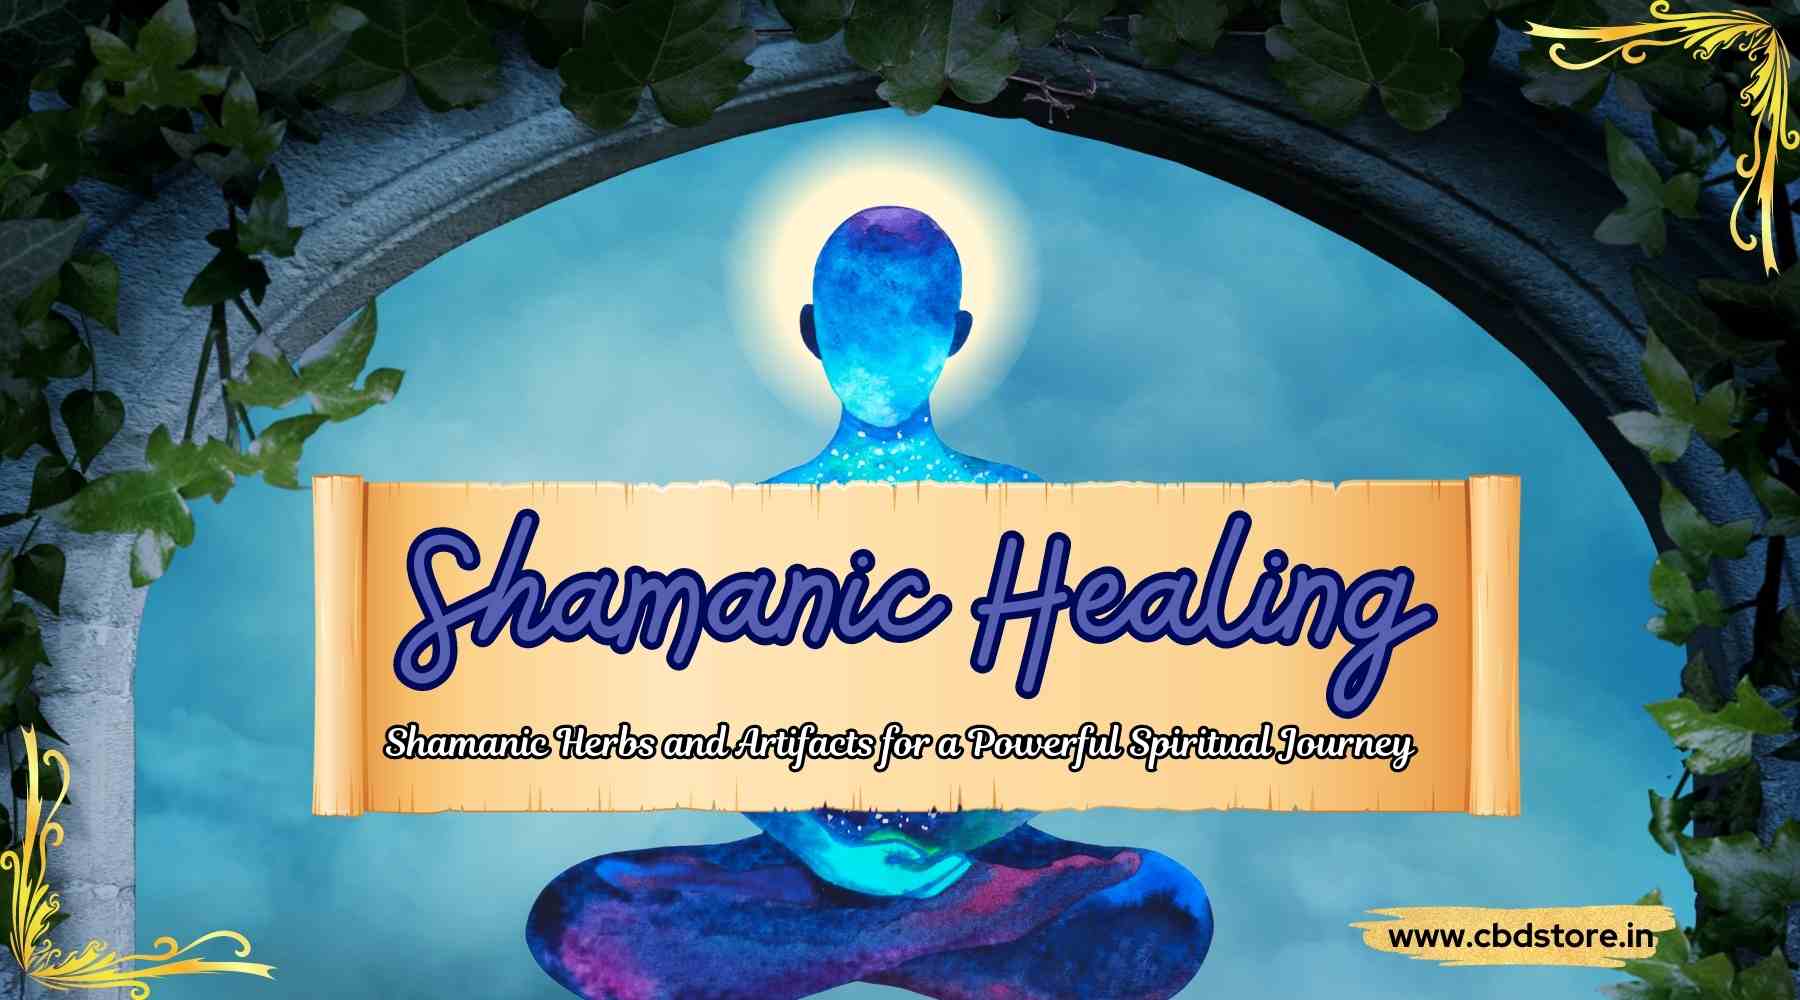 Exploring Shamanic Healing in India - A Guide to Using Shamanic Herbs and Artifacts for a Powerful Spiritual Journey - CBD Store India